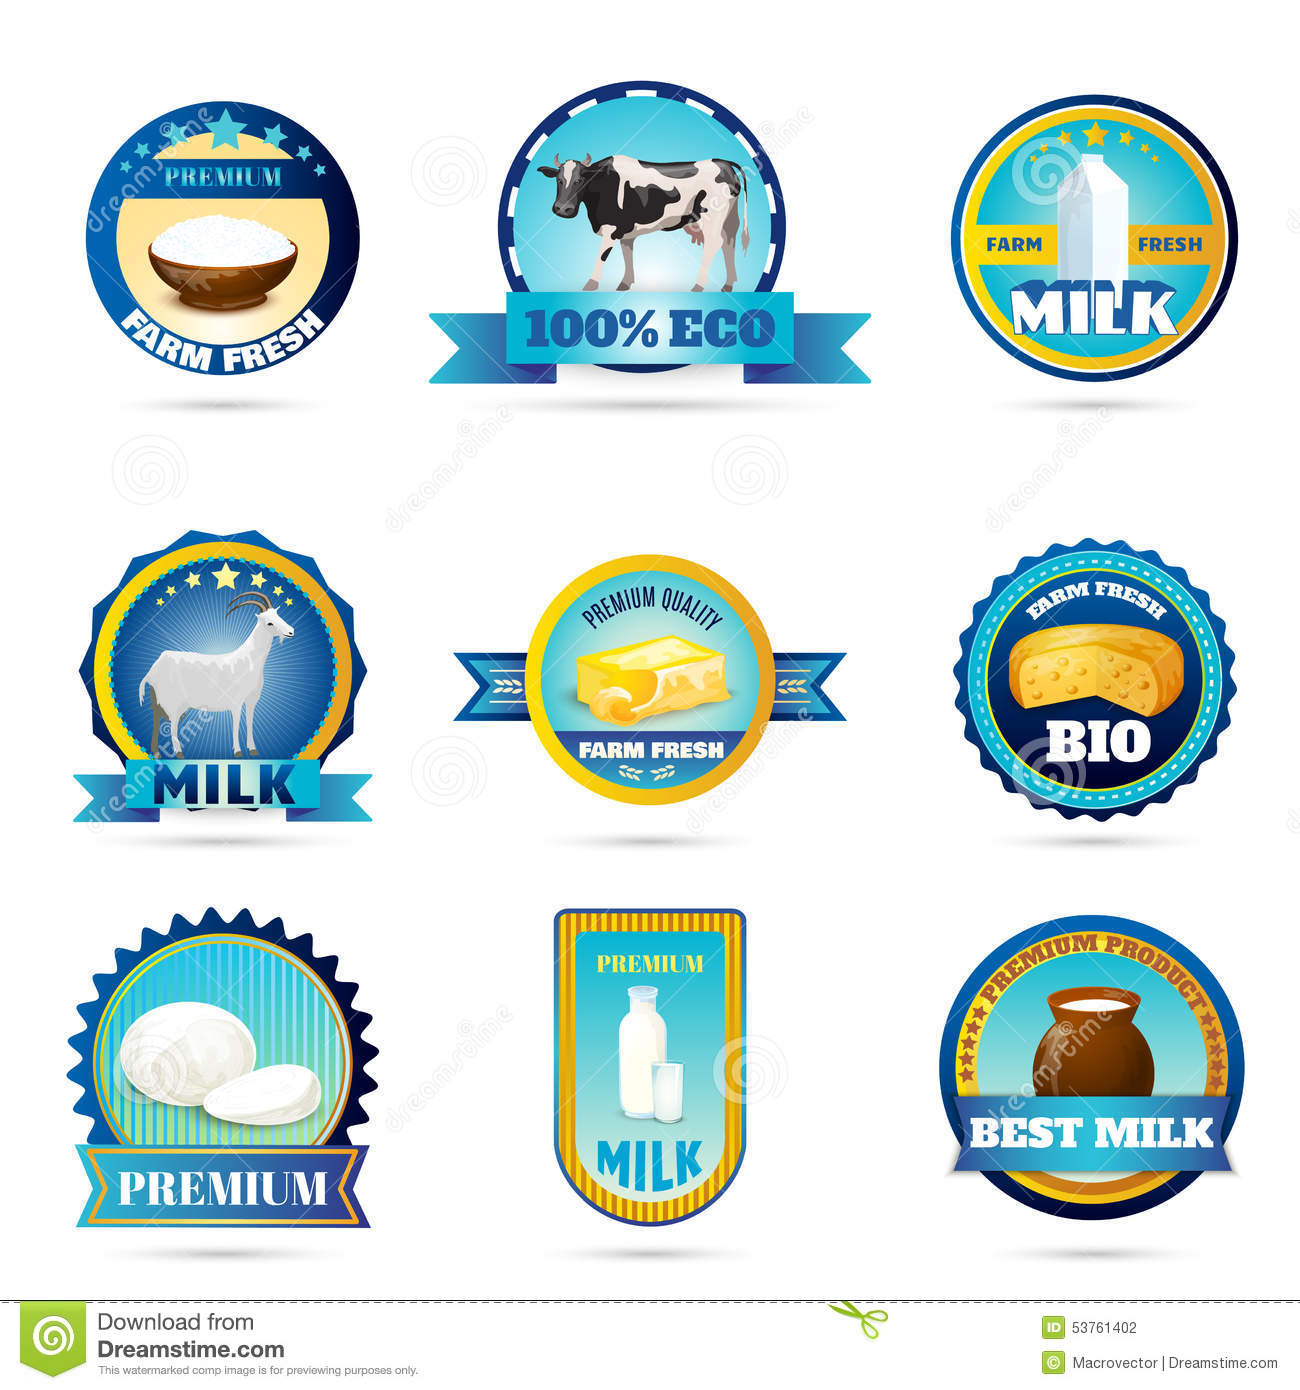 Eco Friendly Farm Fresh Dairy Products Labels Set For Organic Goat